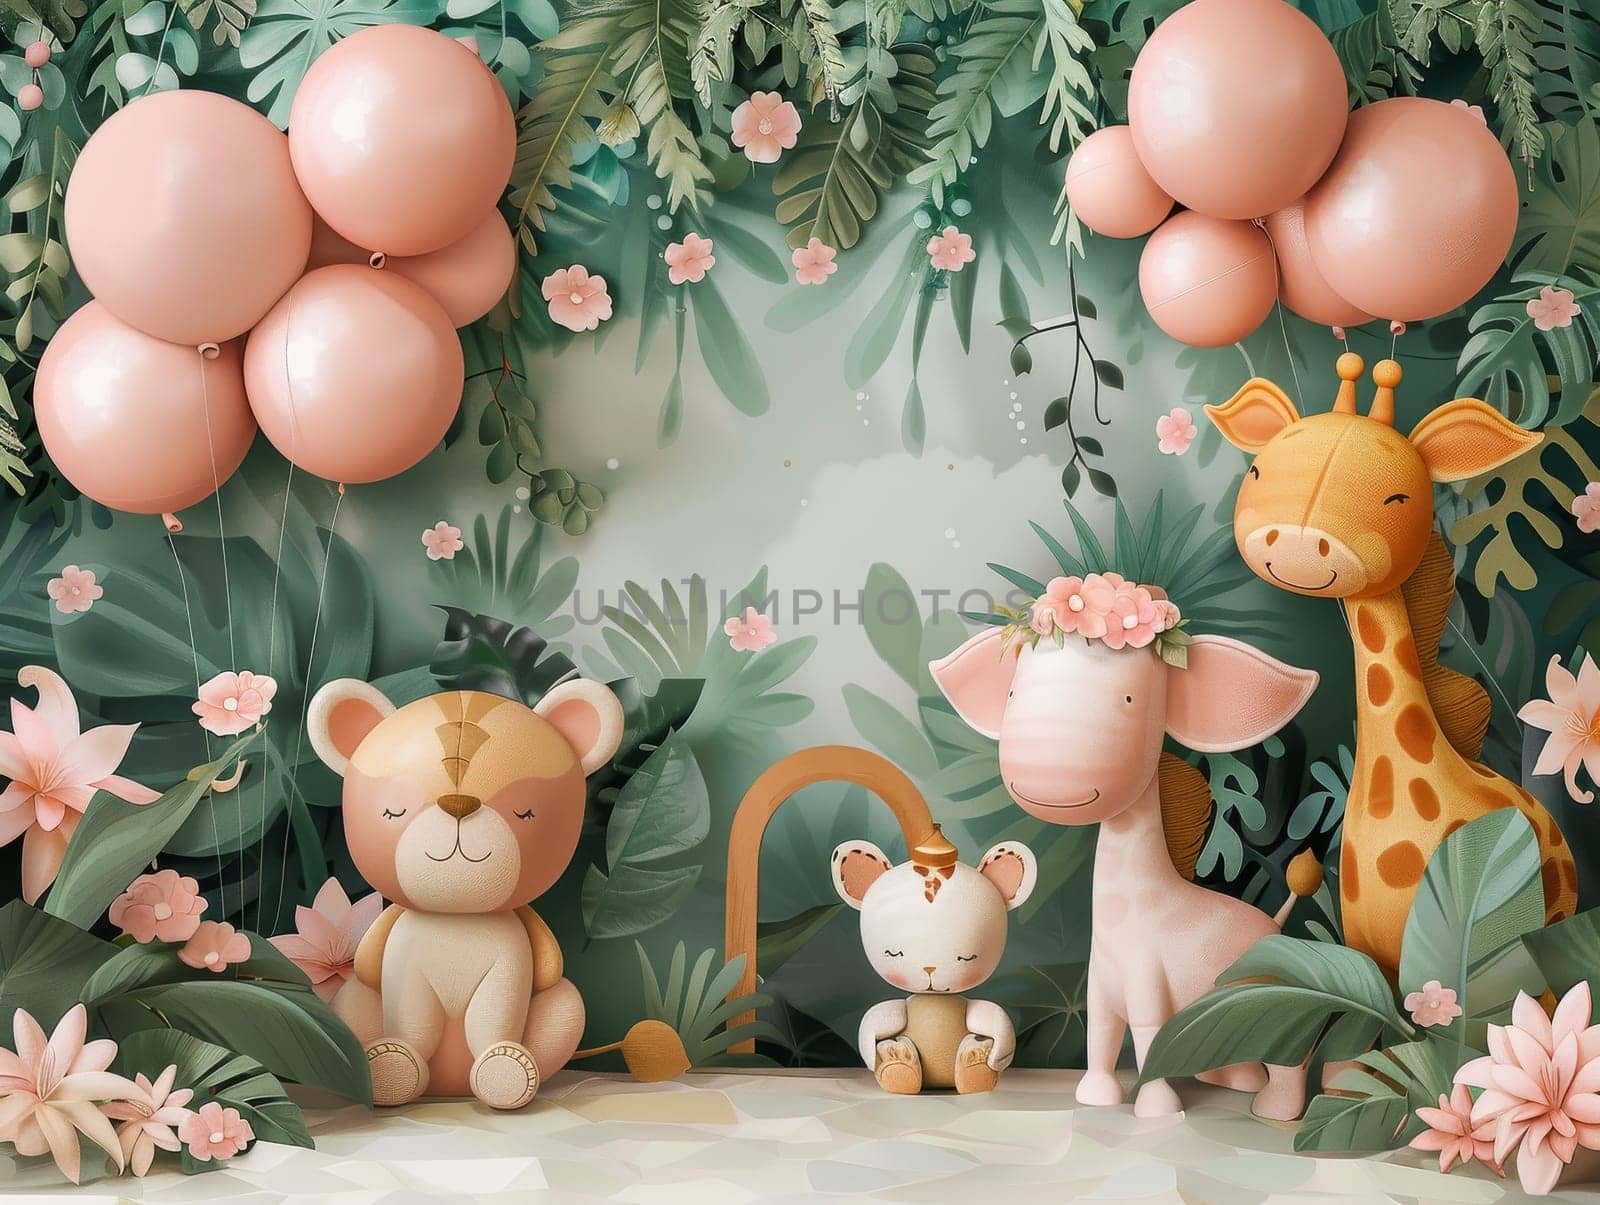 A group of stuffed animals are arranged in a room with pink walls by itchaznong